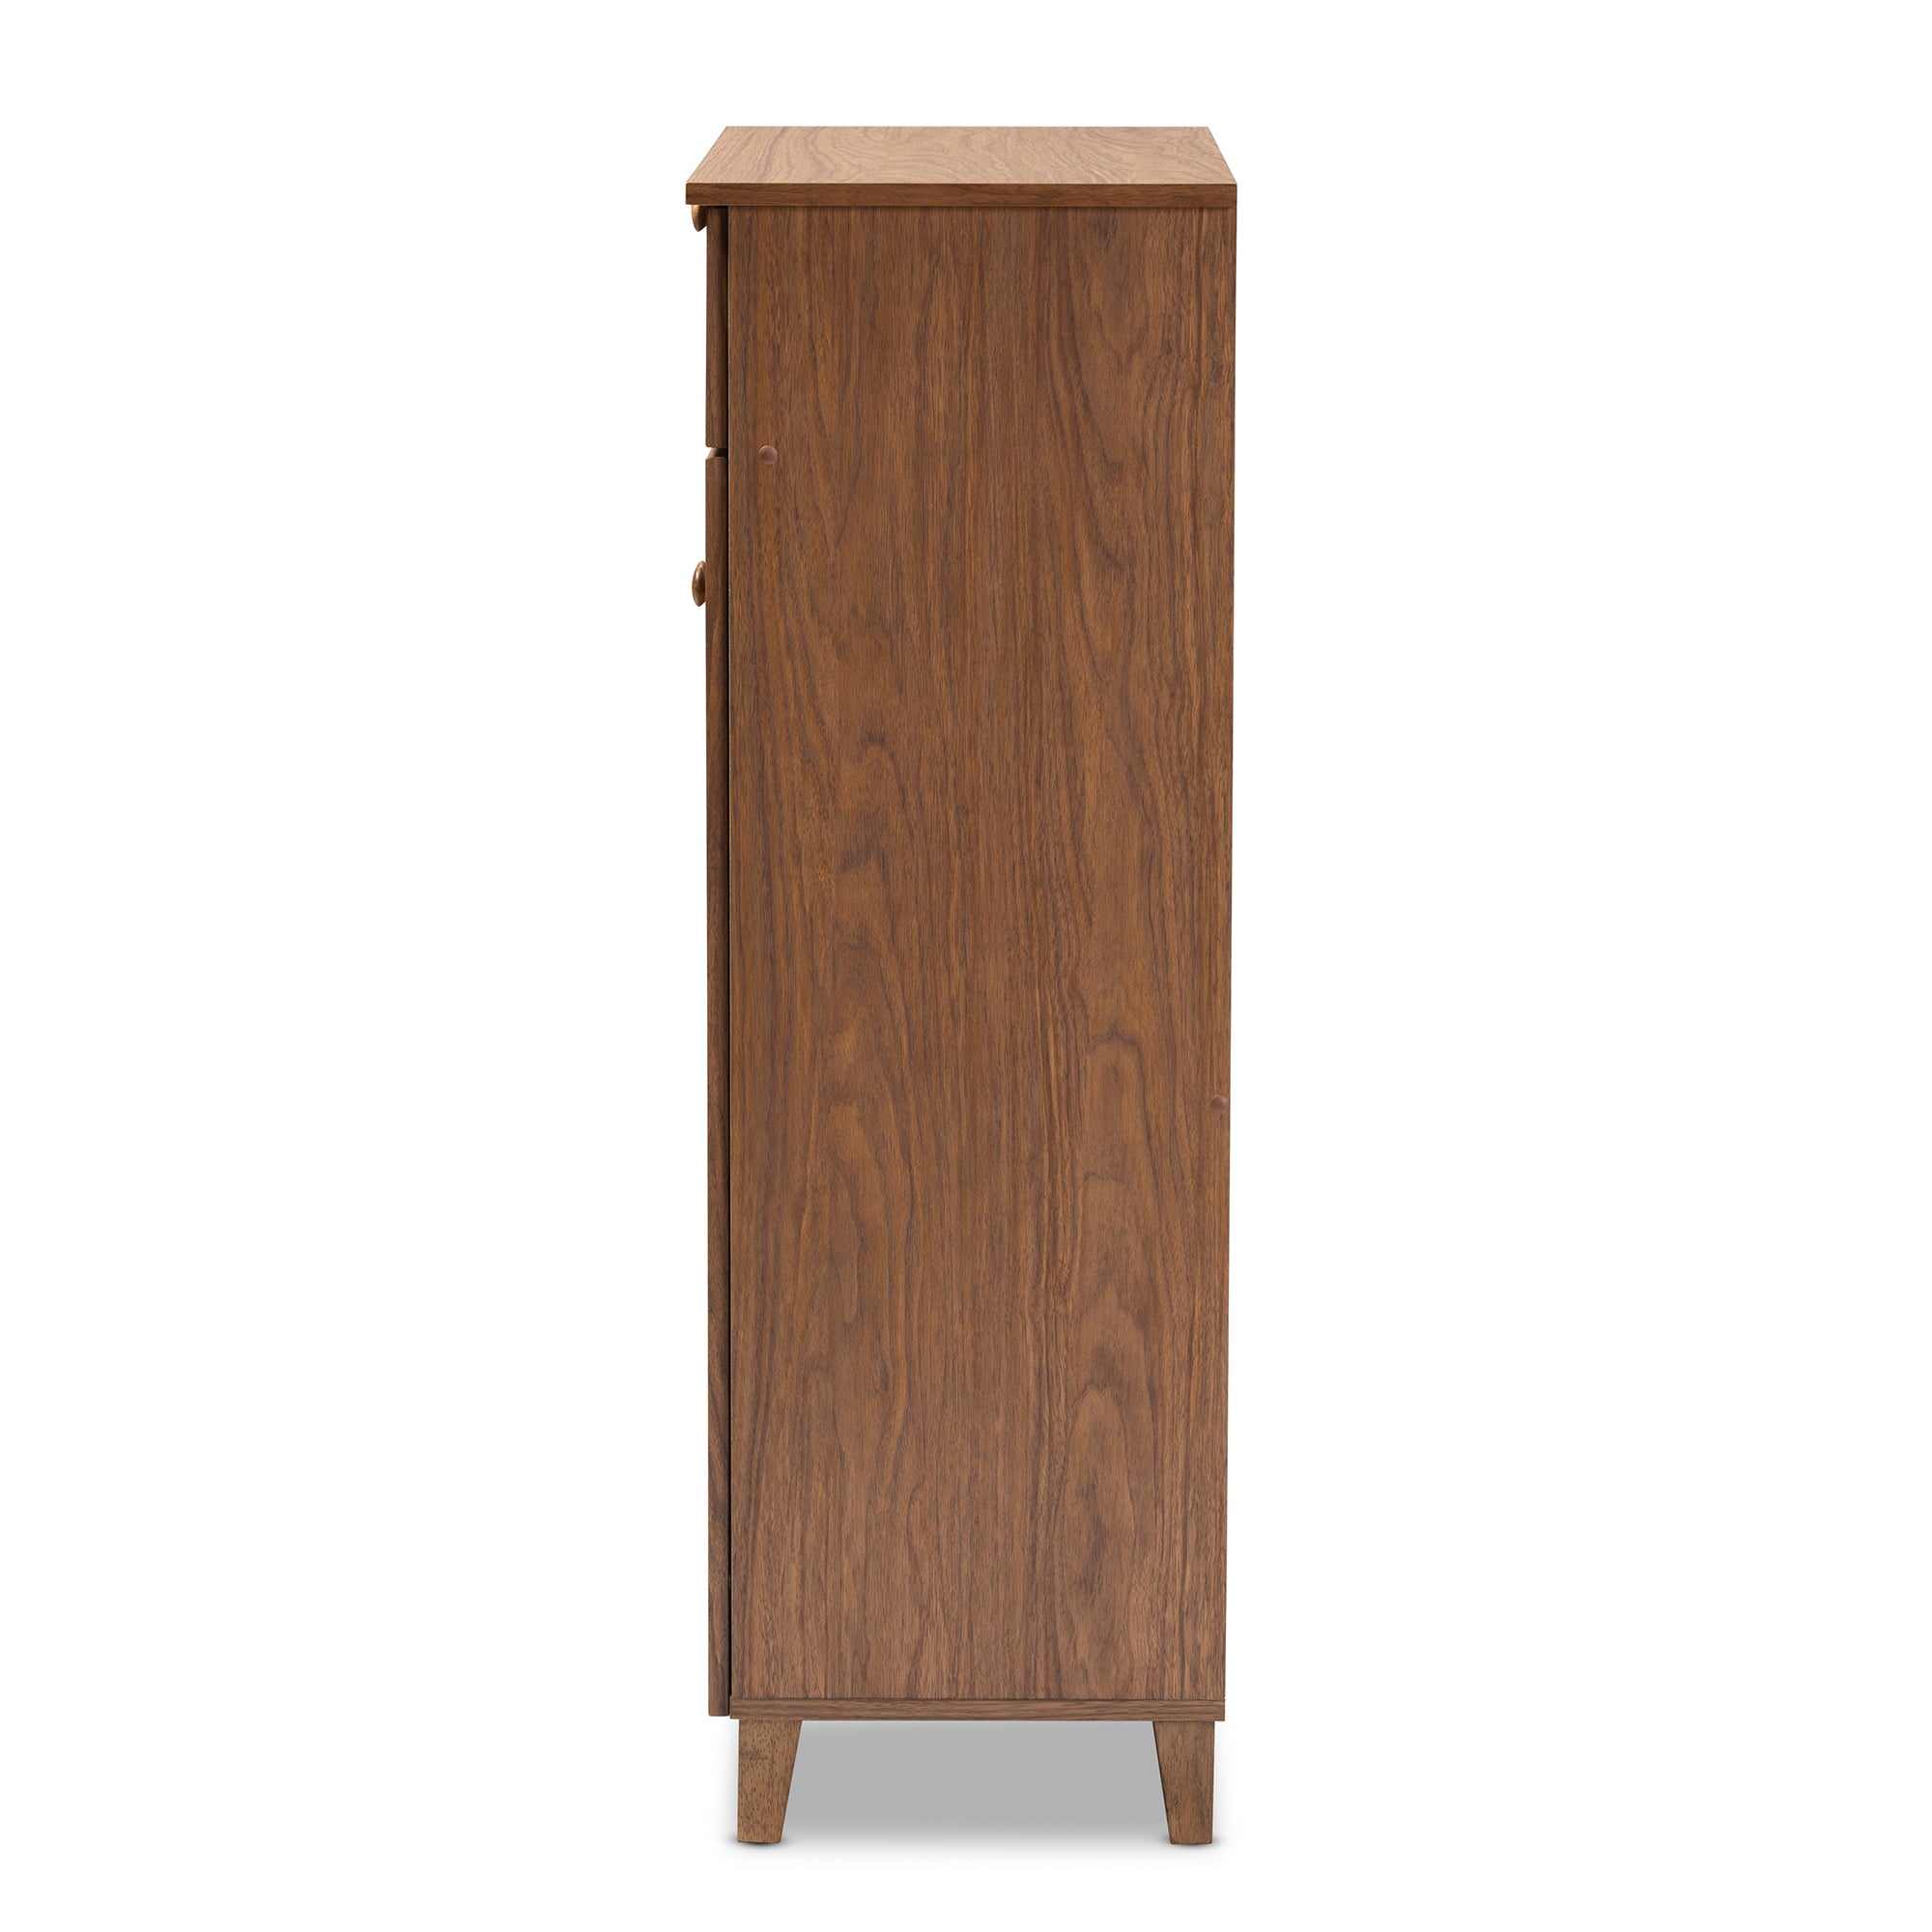 Coolidge Contemporary Shoe Cabinet 5-Shelf with Drawer-Shoe Cabinet-Baxton Studio - WI-Wall2Wall Furnishings